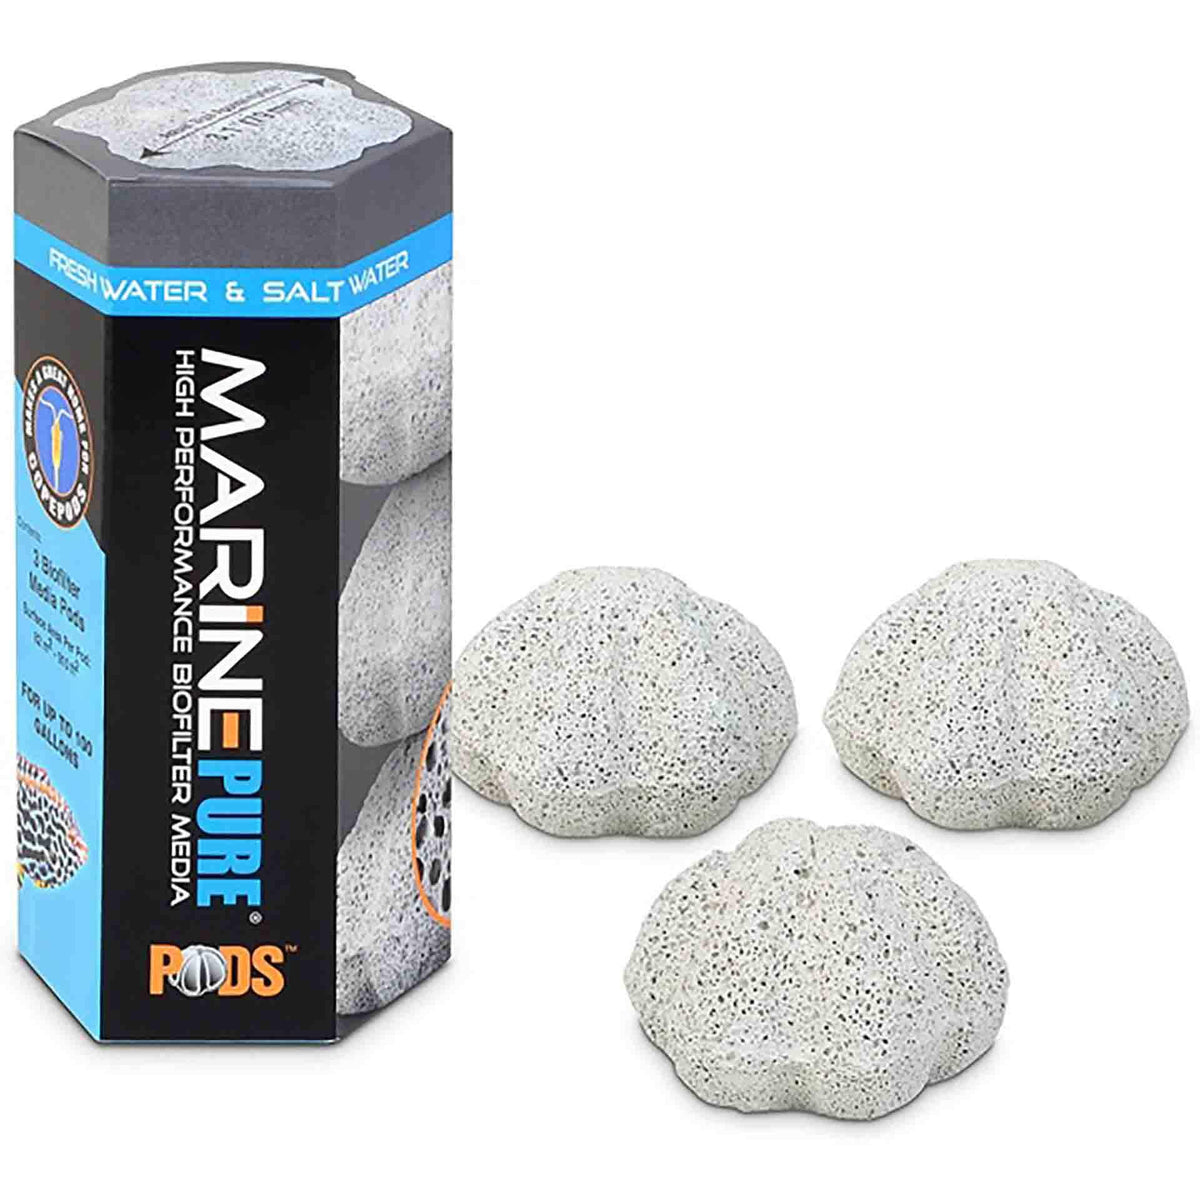 MarinePure Pods - 3 Pack - Treats up to 370l